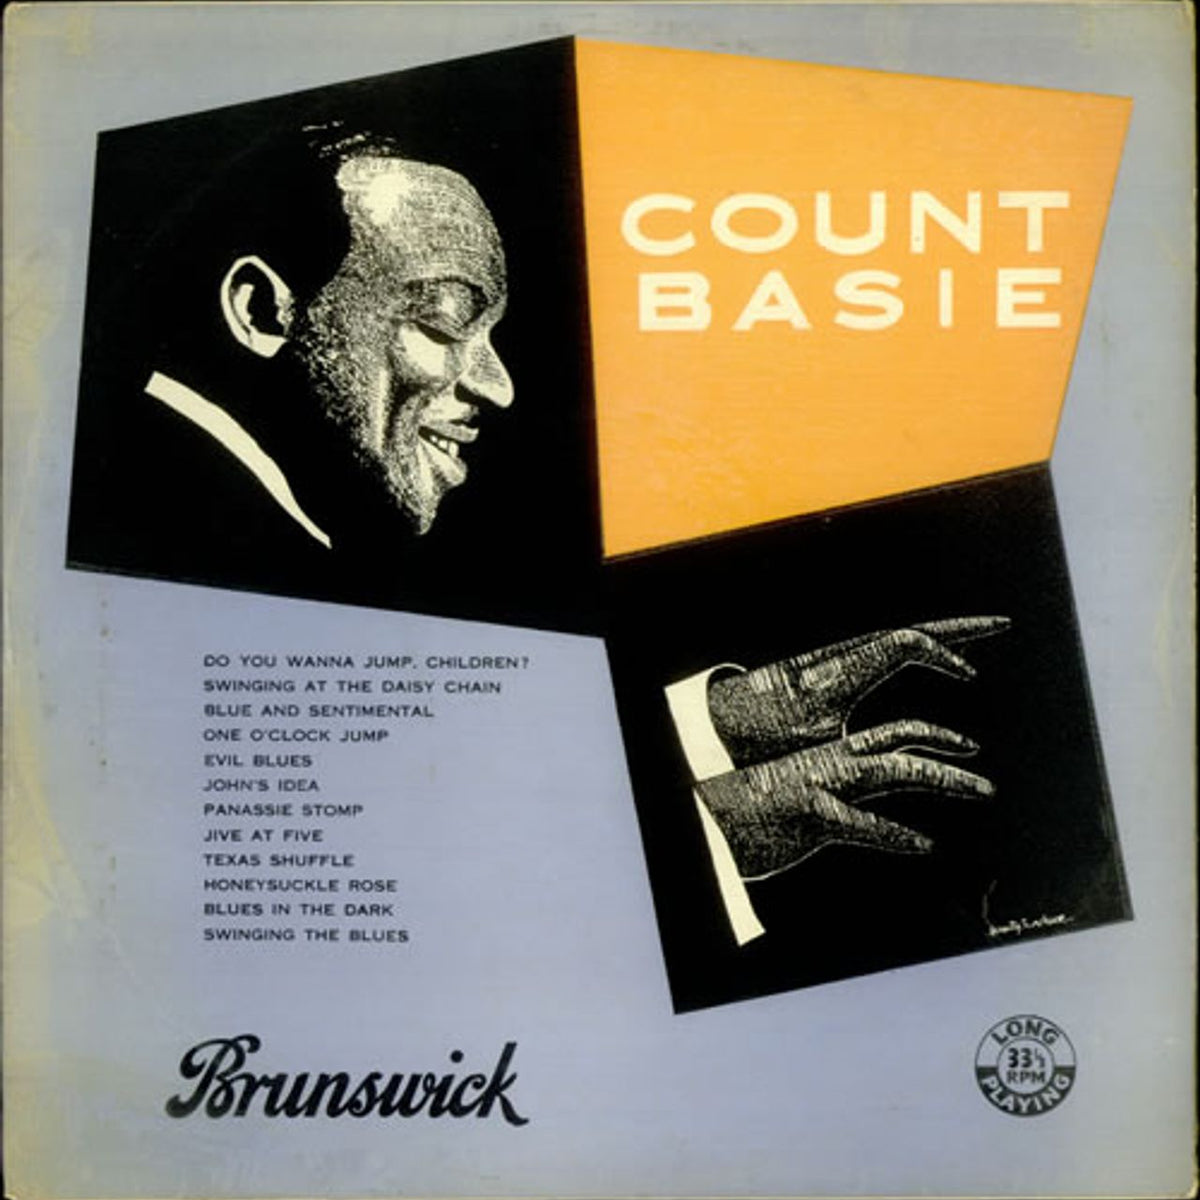 Basie　Early　Count　LP　Count　Vinyl　And　Basie　UK　60s　His　Orchestra　—